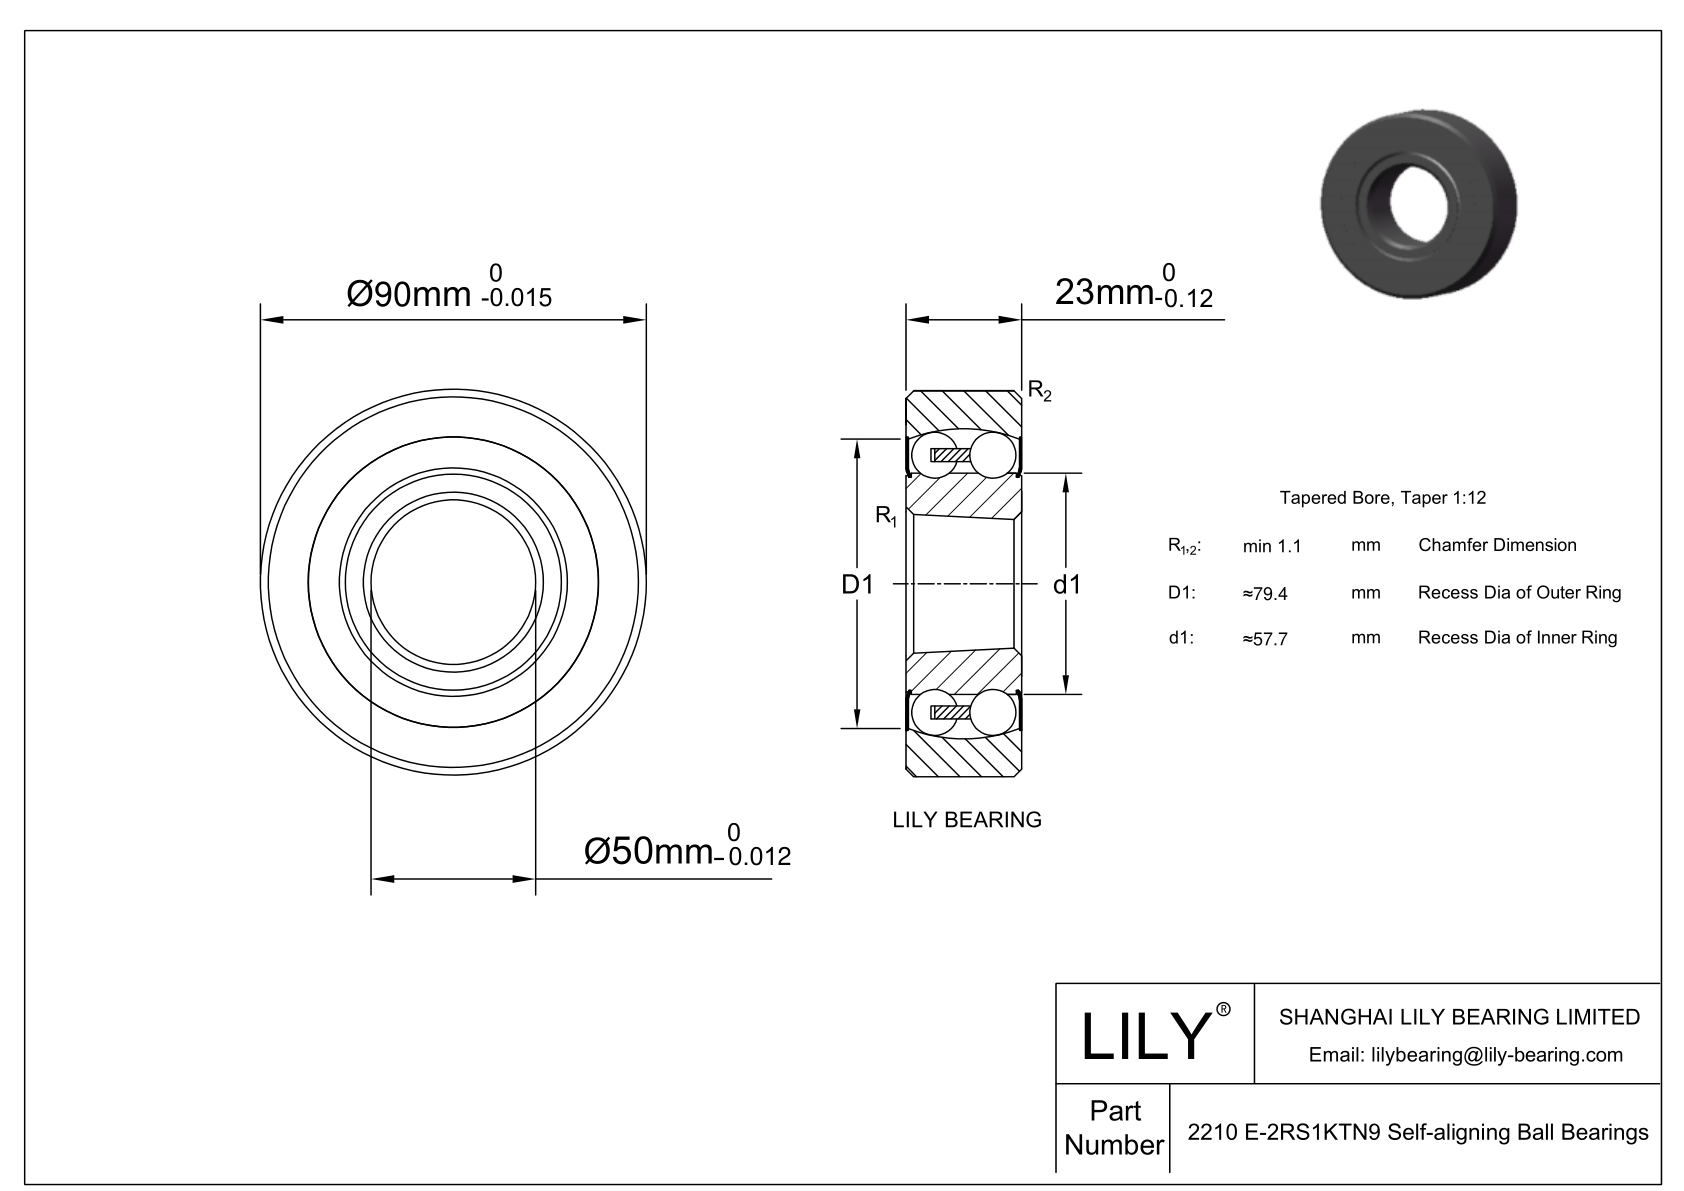 CE2210 E-SIPP Silicon Nitride Self Aligning Ball Bearings cad drawing